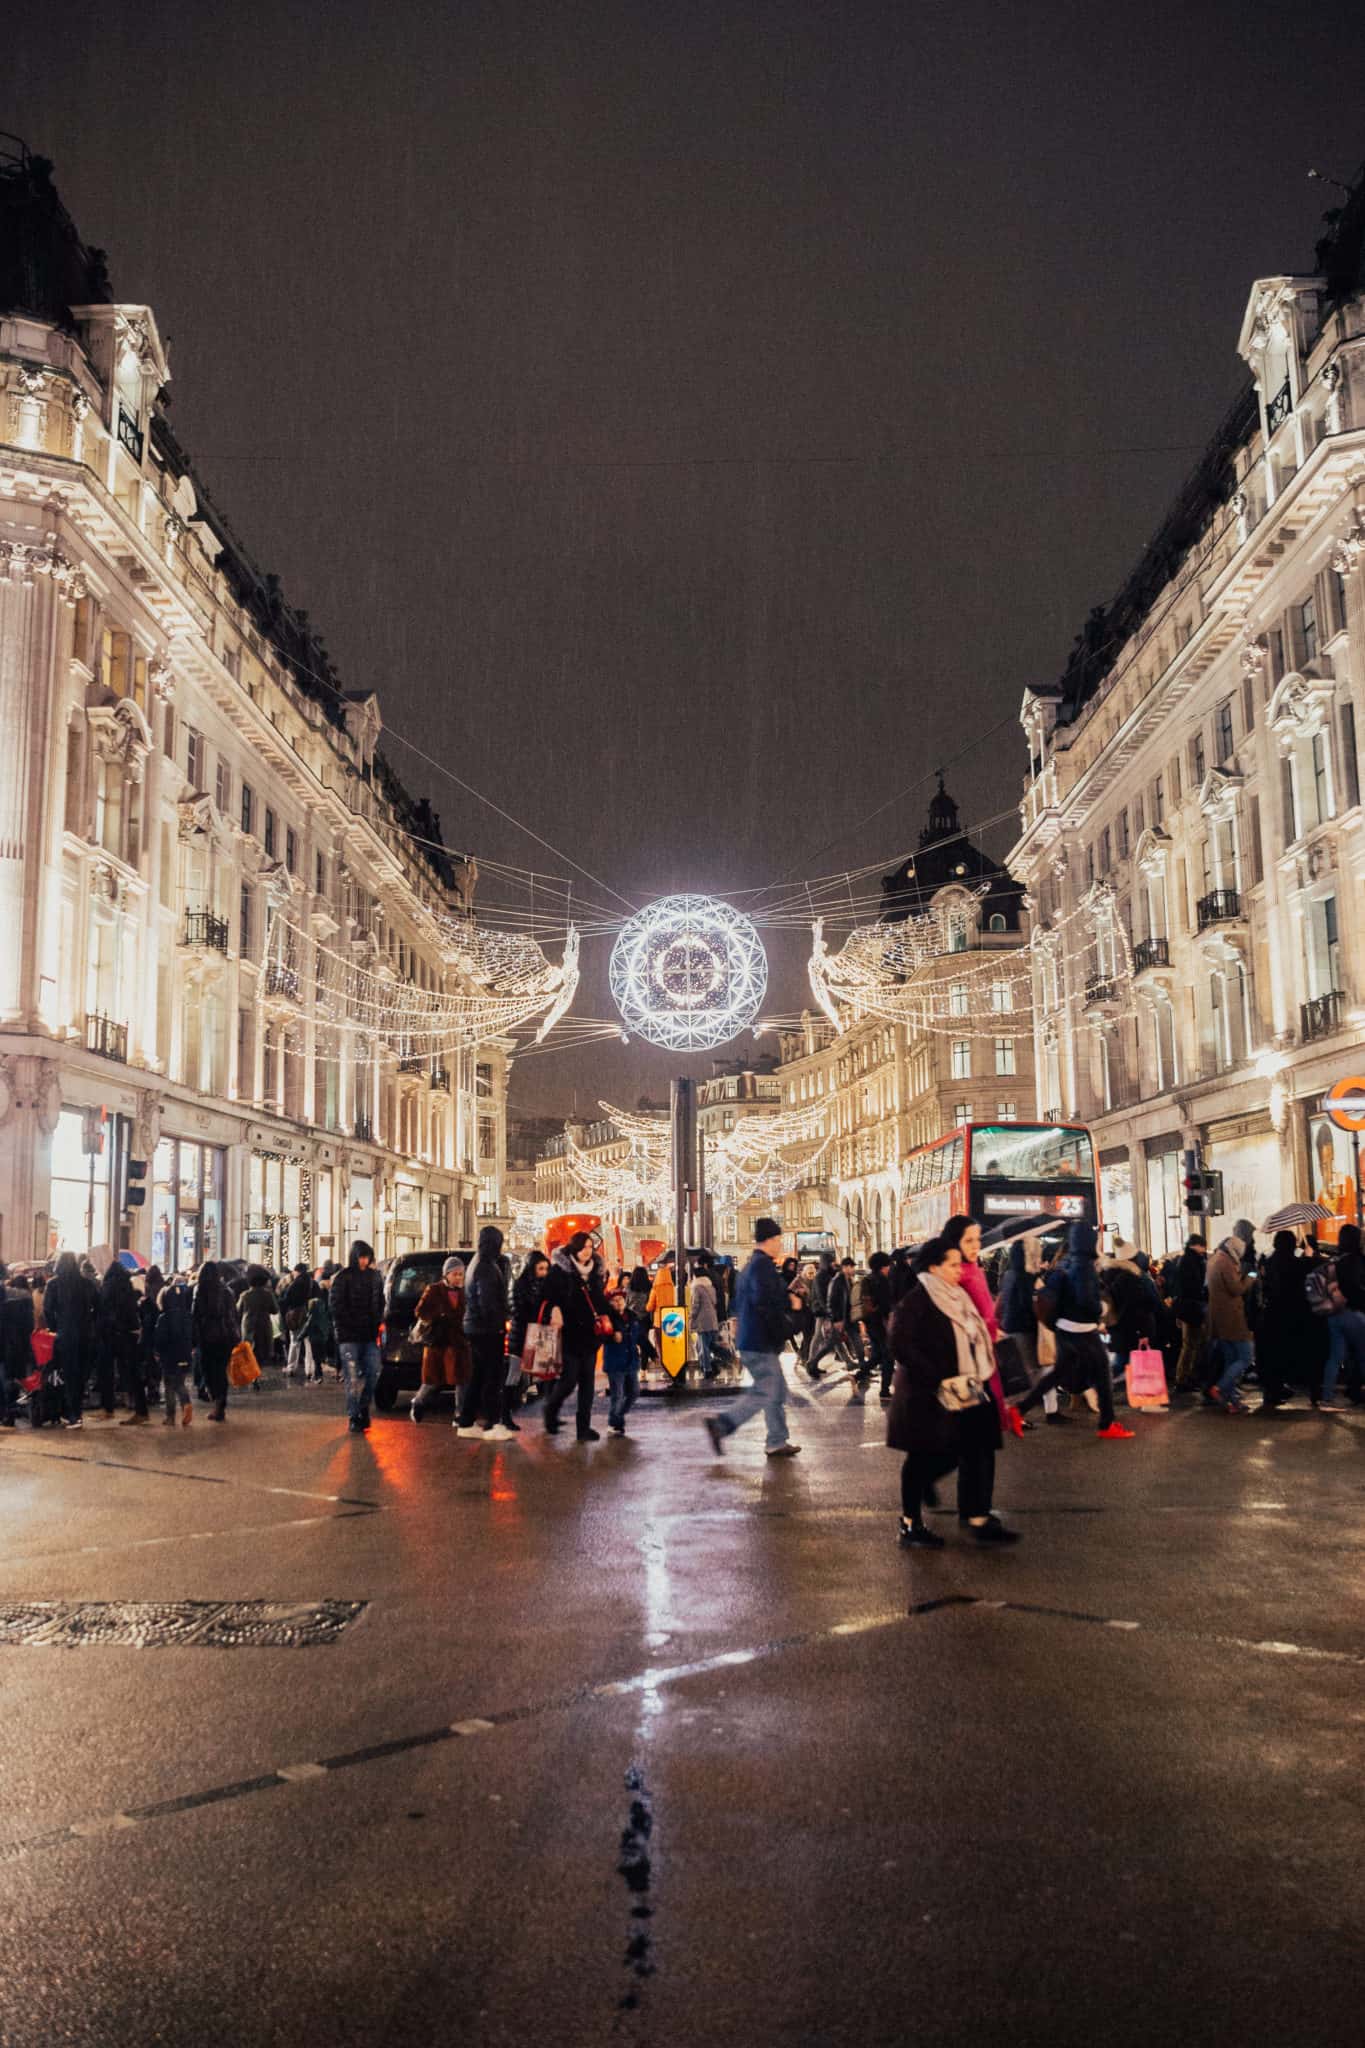 If you're looking for the best things to do in London during winter, this post is for you! We're sharing why this time of year is the ideal time to visit London - hardly any tourists, cheaper prices, and of course, Christmas cheer!